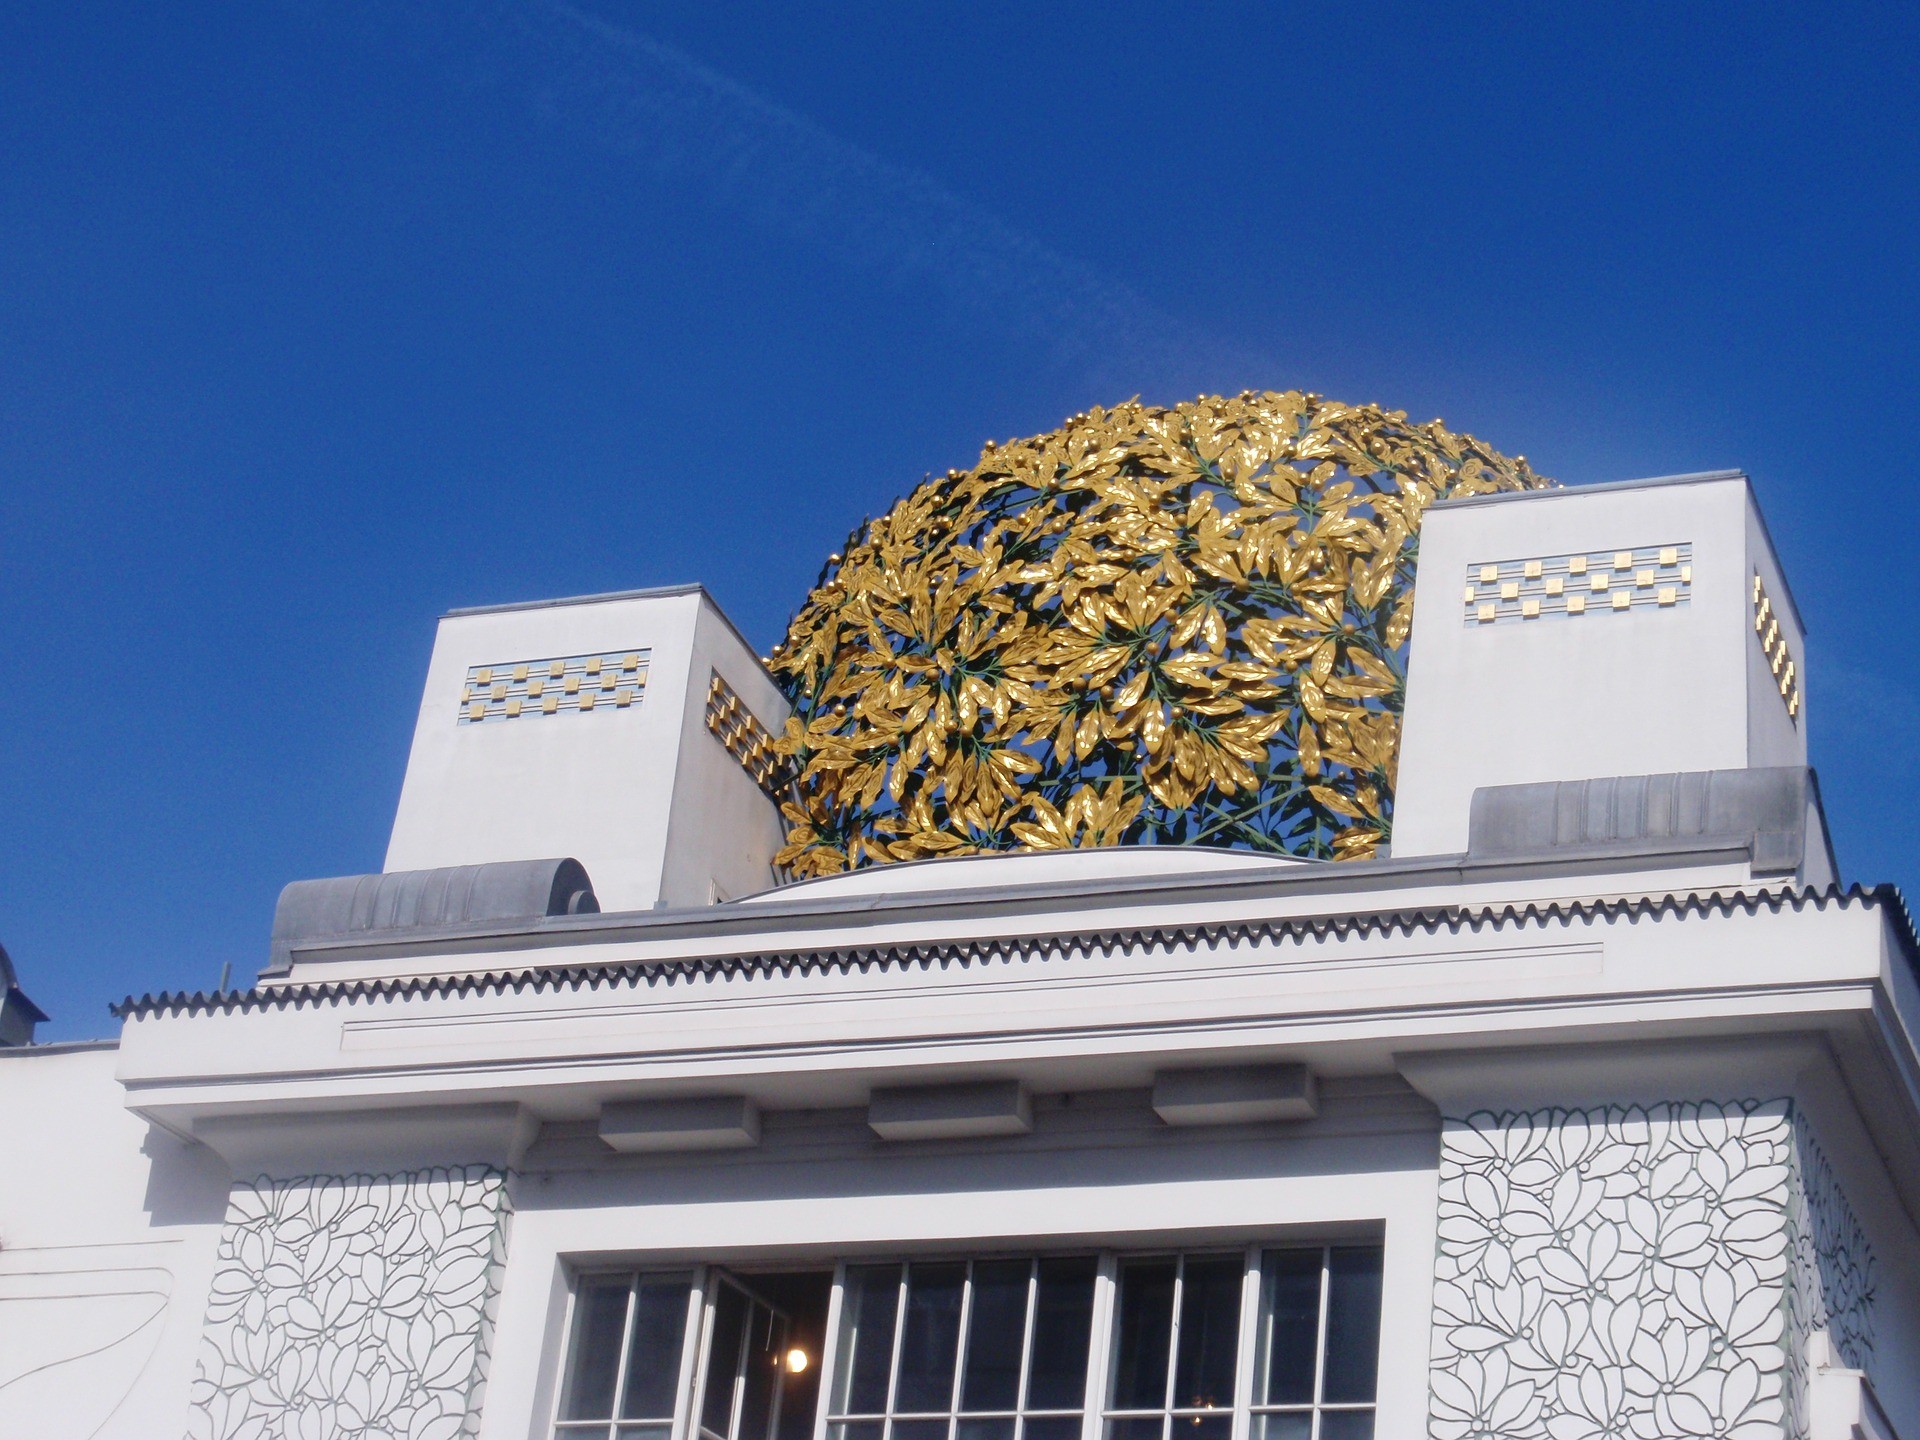 Secession Building, Vienna: All year